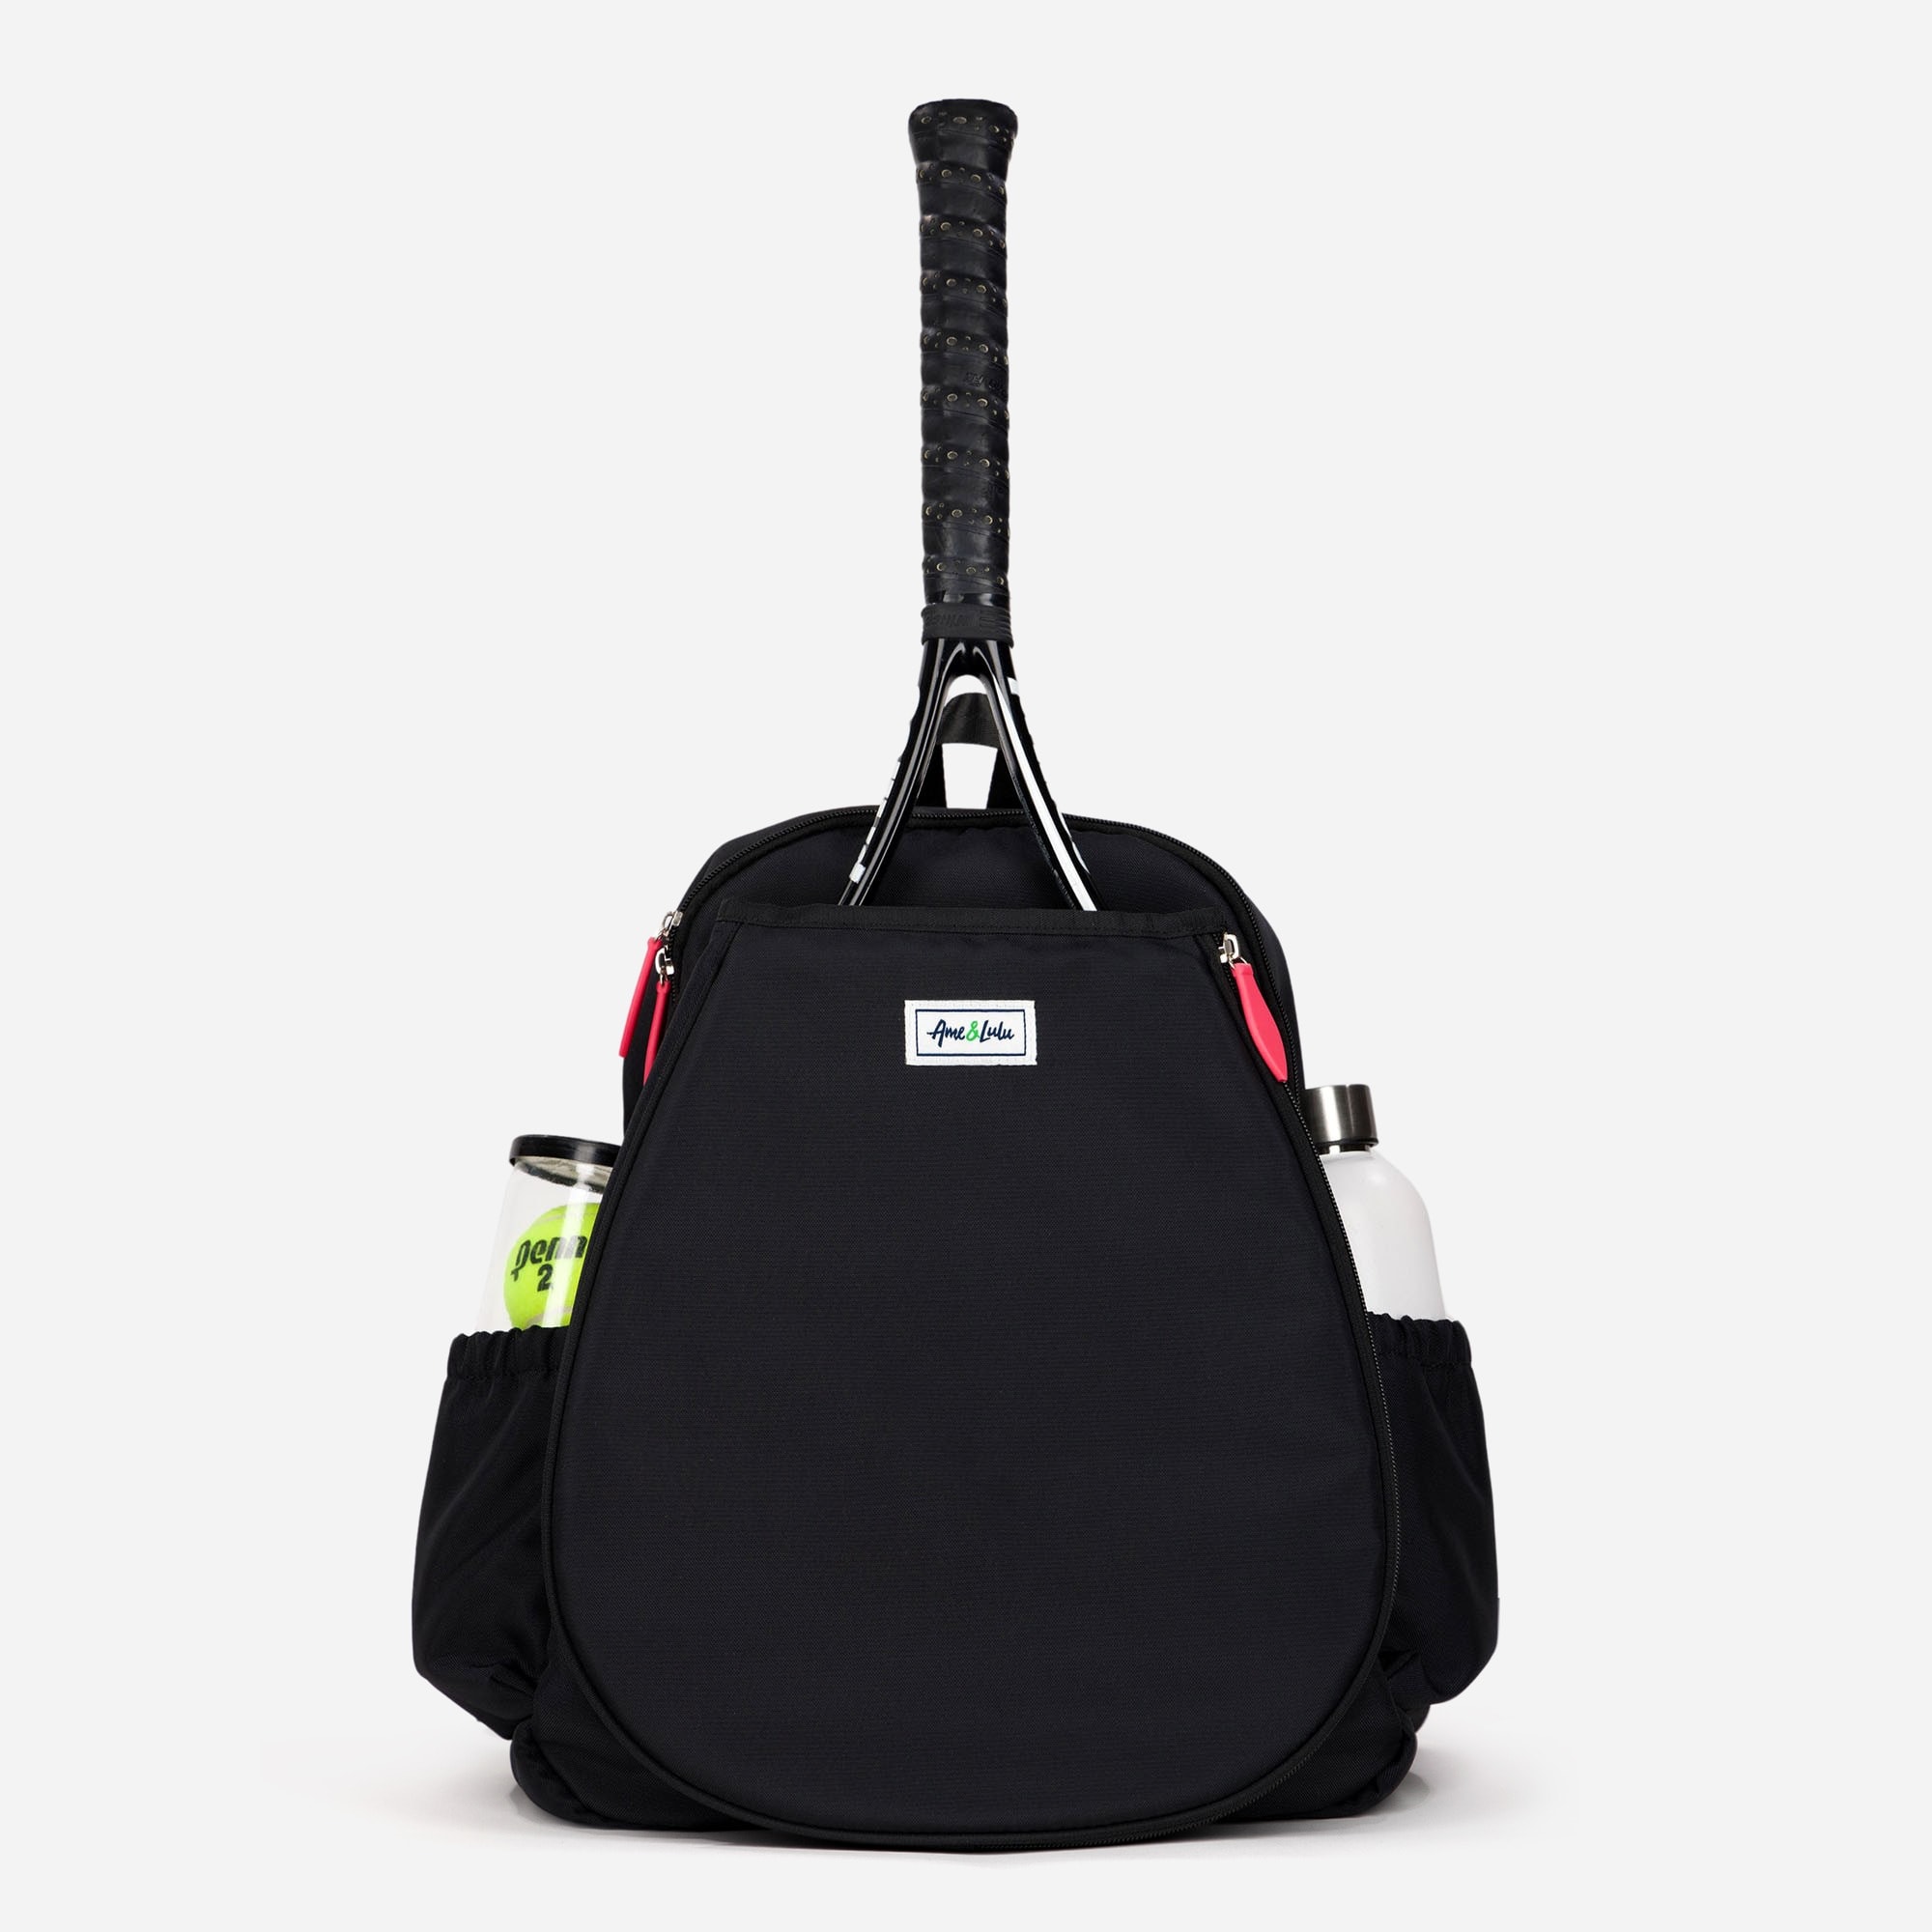  Ame &amp; Lulu women&apos;s game on tennis backpack